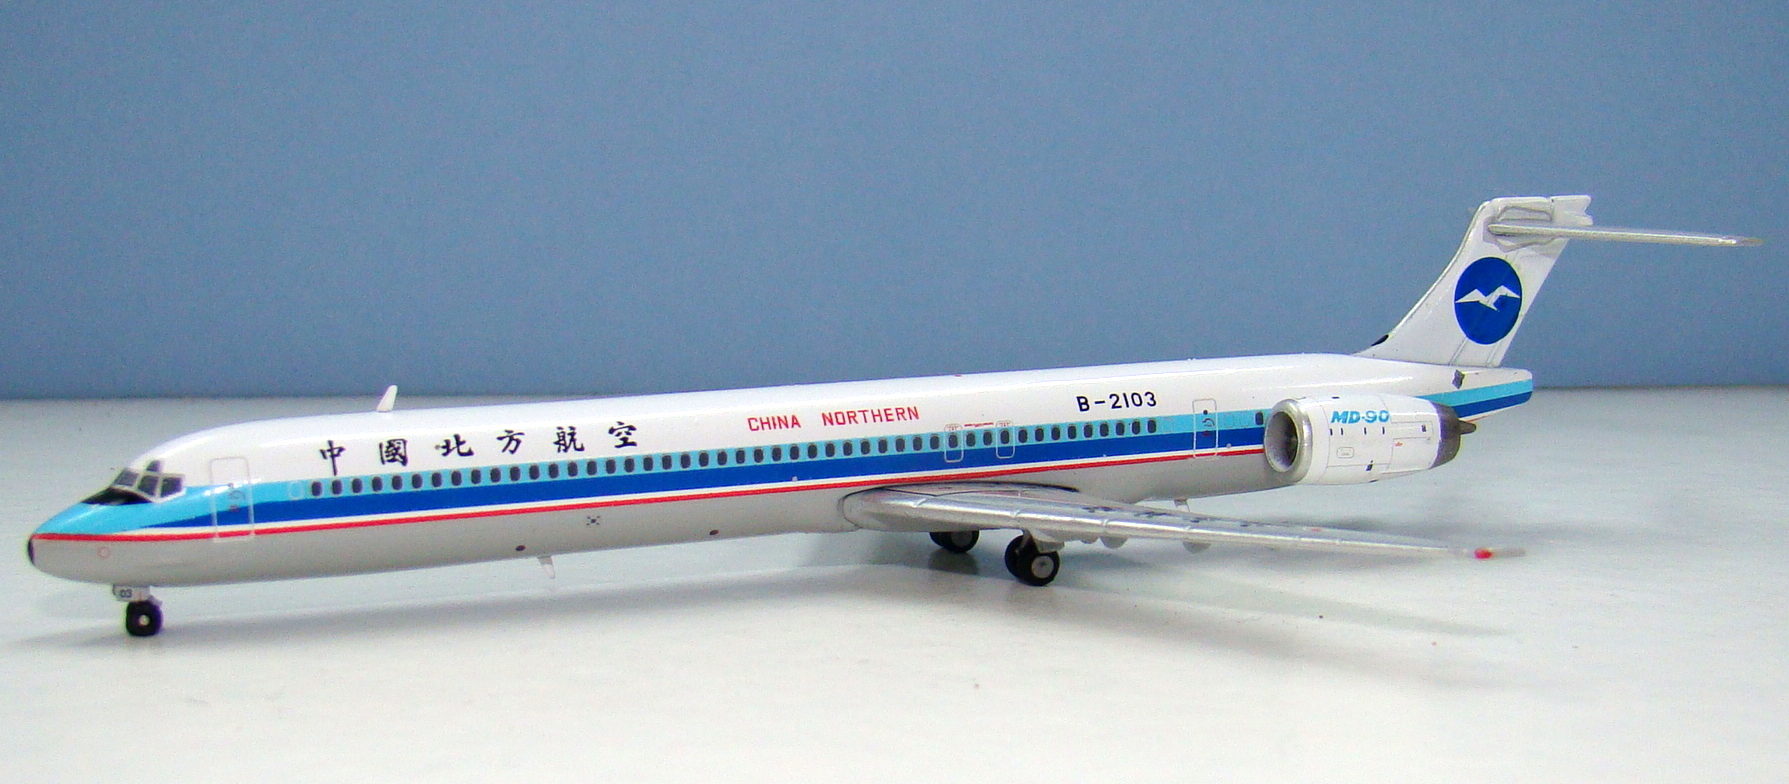 Made in China: China Northern McDonnell Douglas MD-90 B-2103 by JC